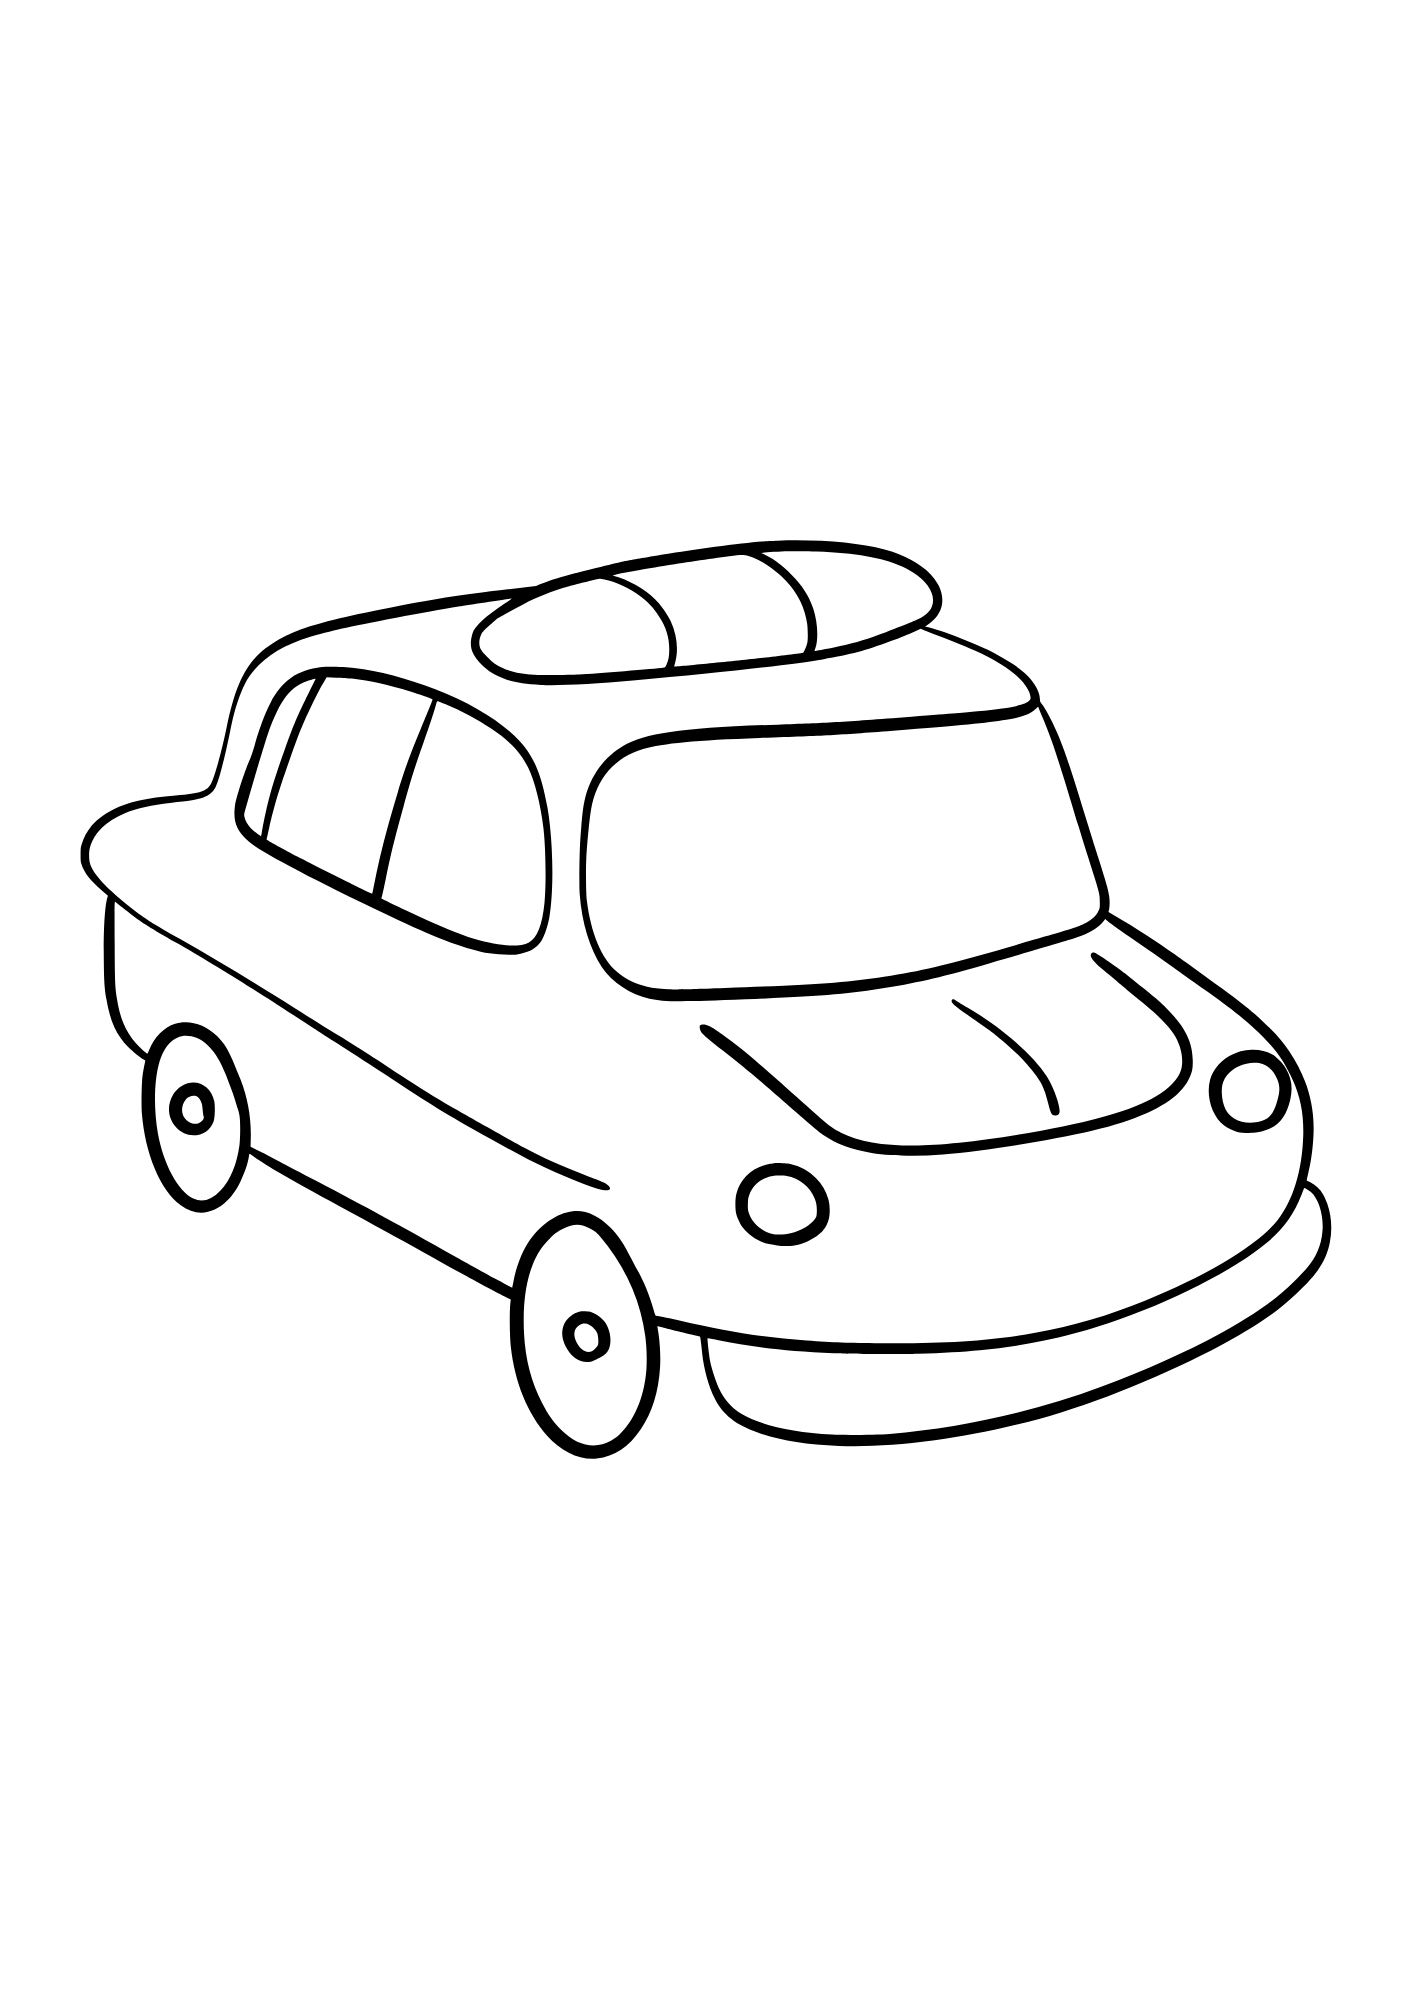 Police Car For Kids Image Coloring Pages